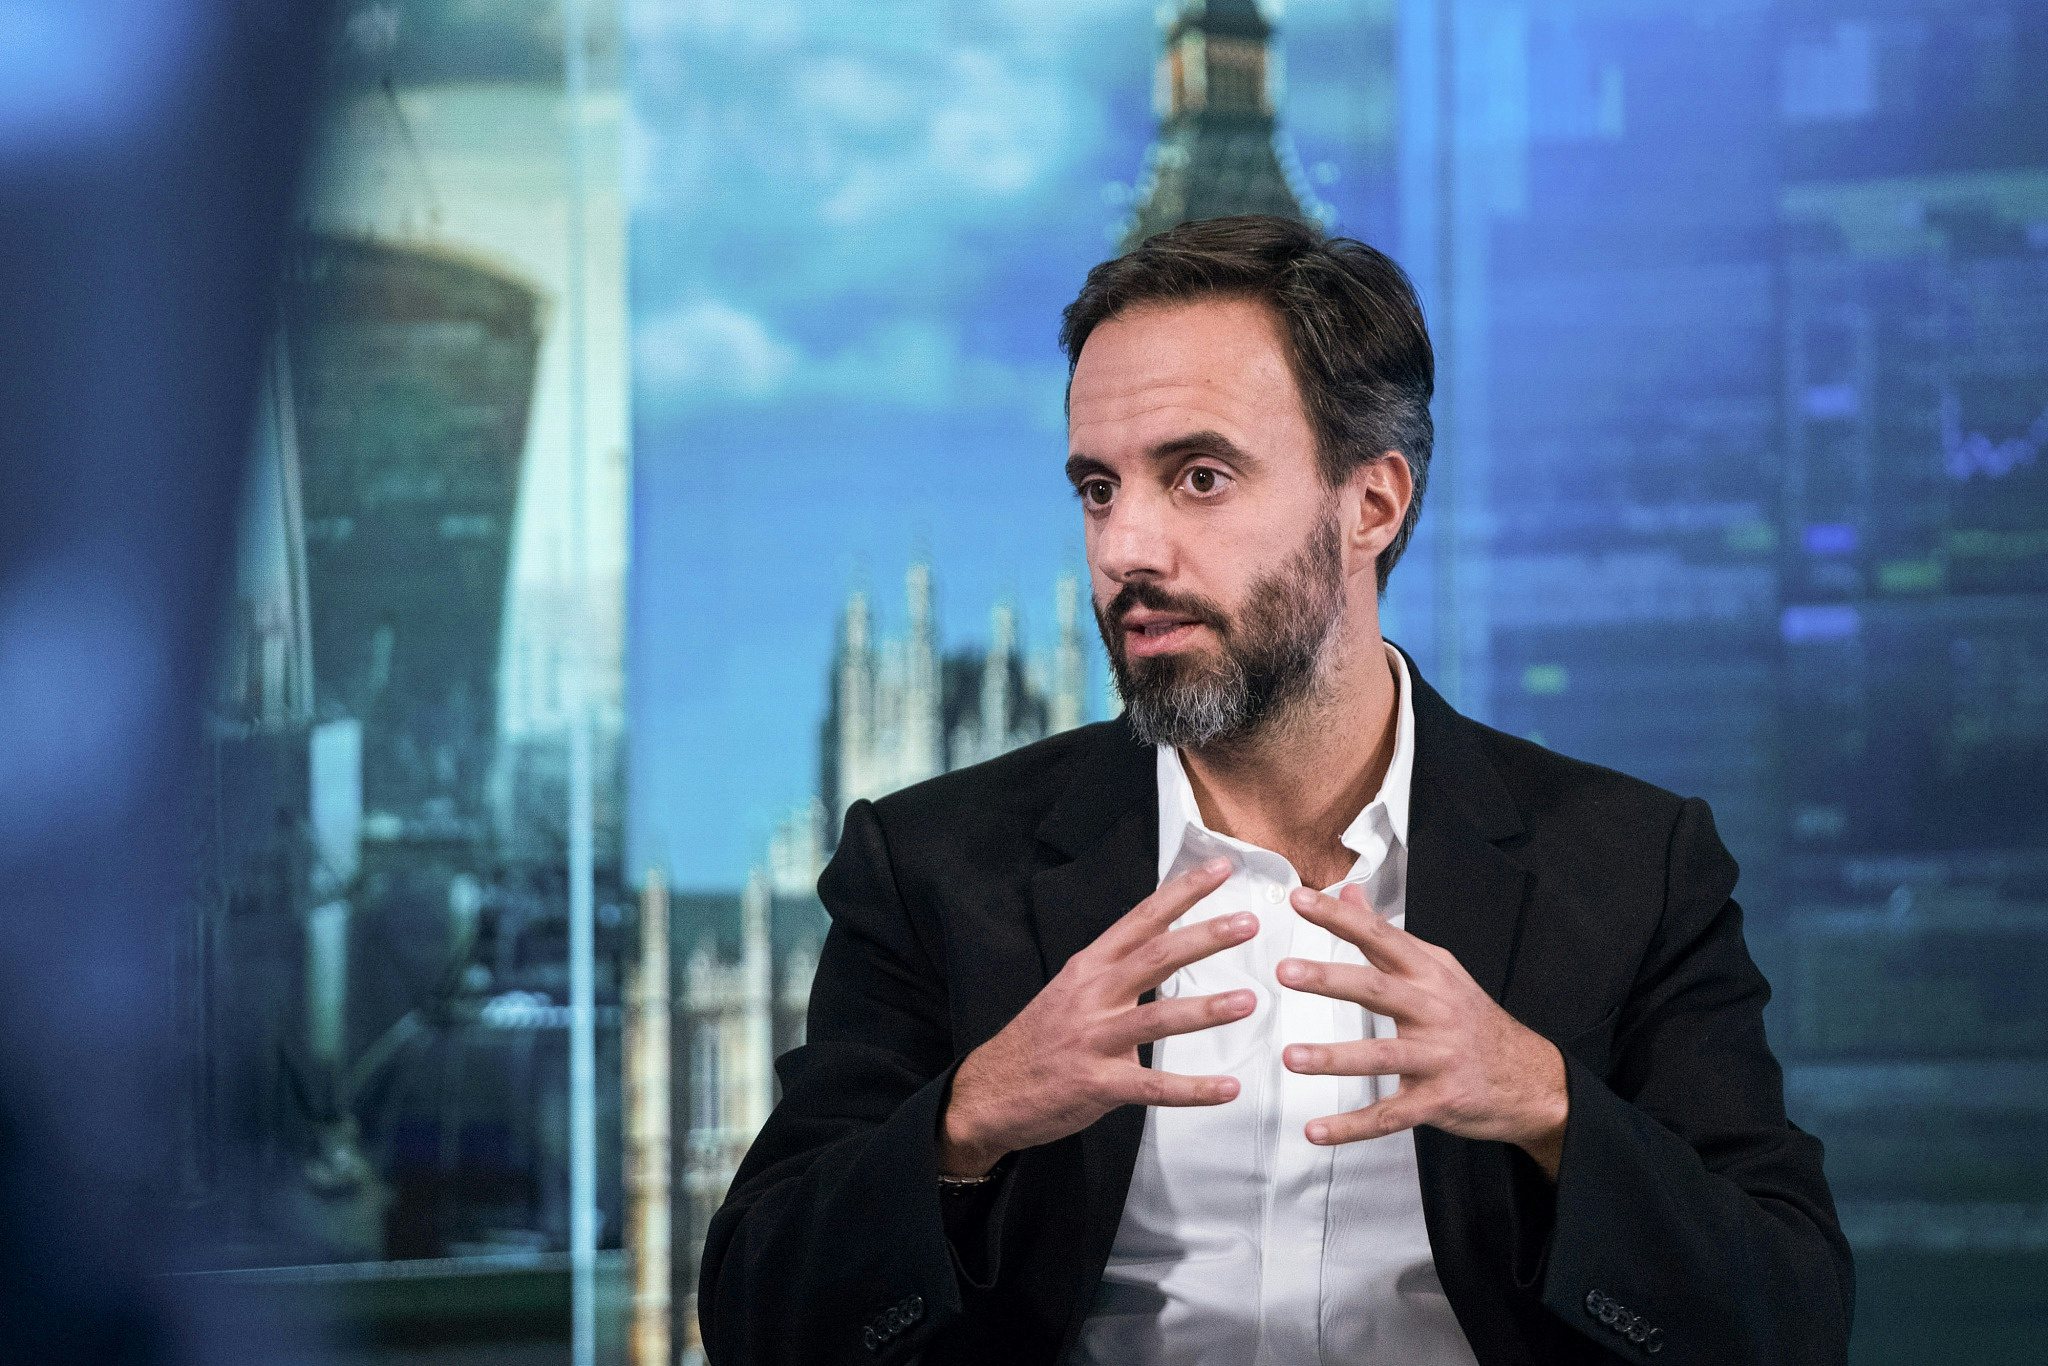 Jose Neves, founder and chief executive officer of Farfetch. Photographer: Chris Ratcliffe/Bloomberg